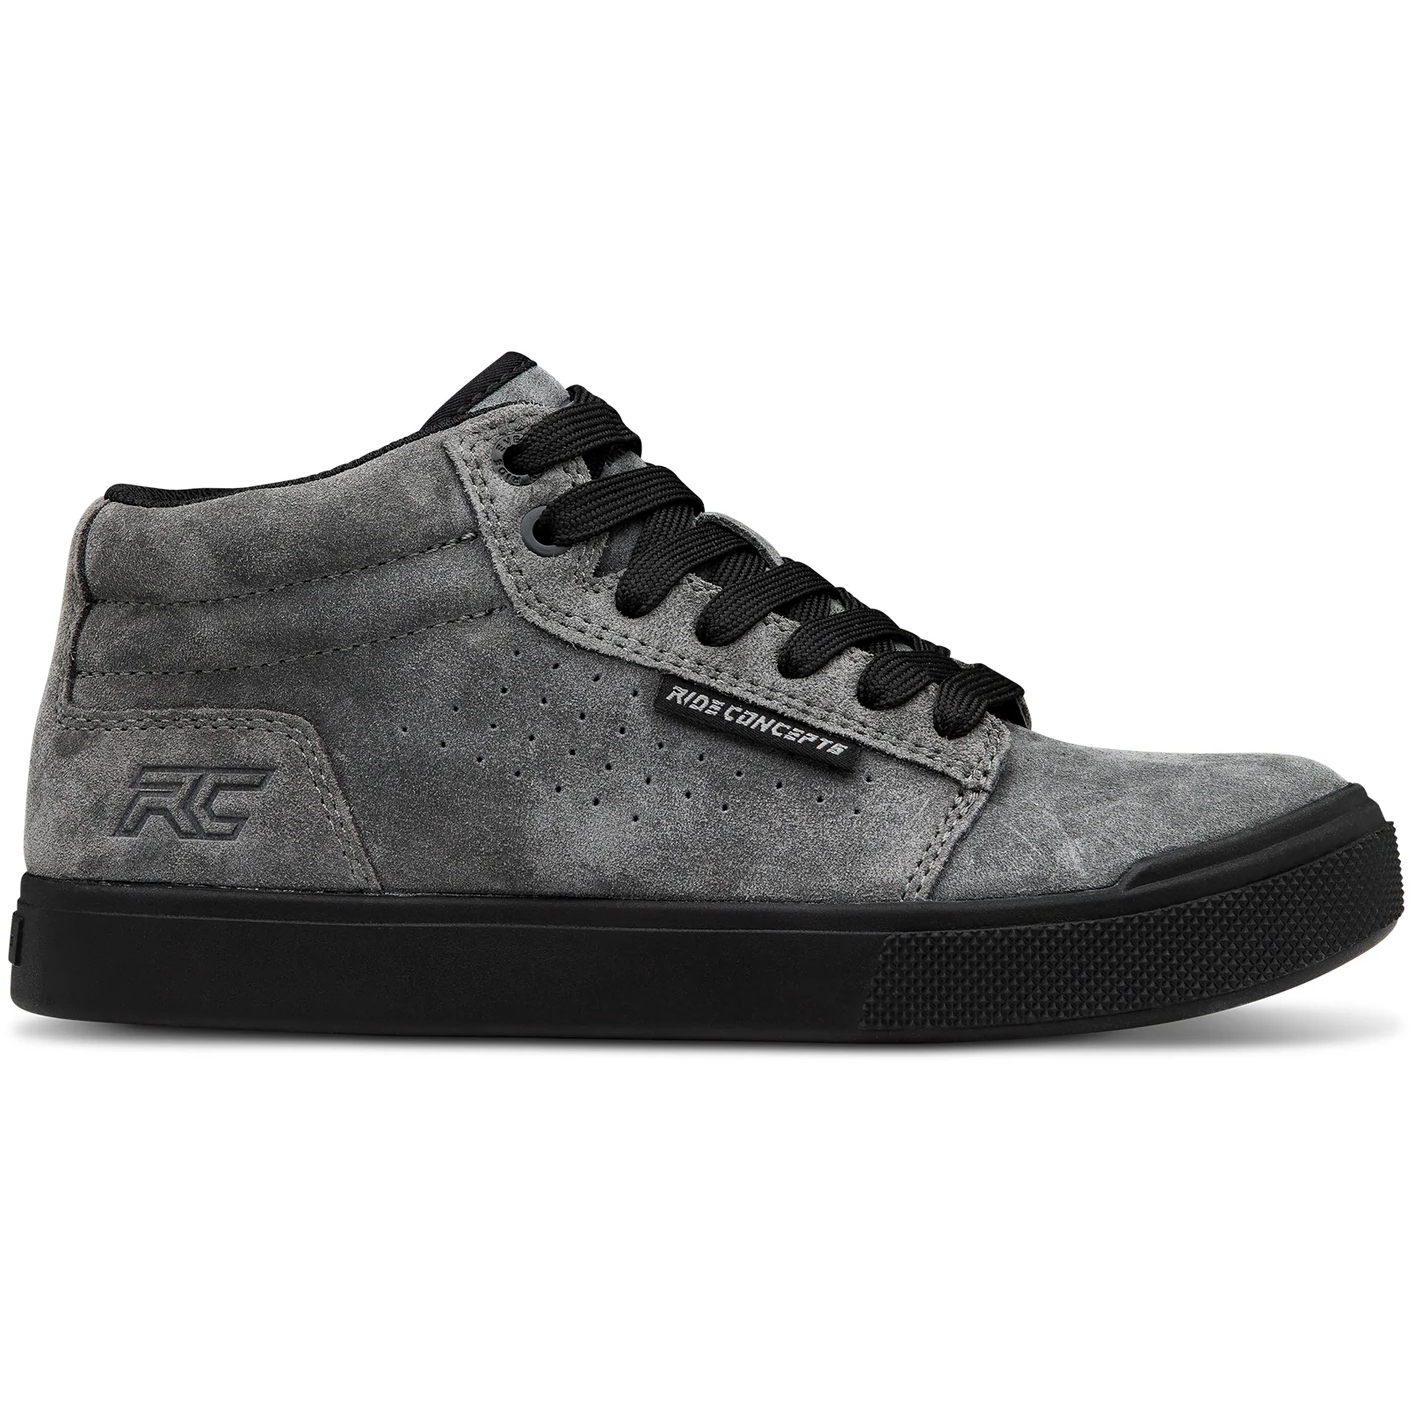 Productfoto van Ride Concepts Vice Mid Youth Shoe - Charcoal